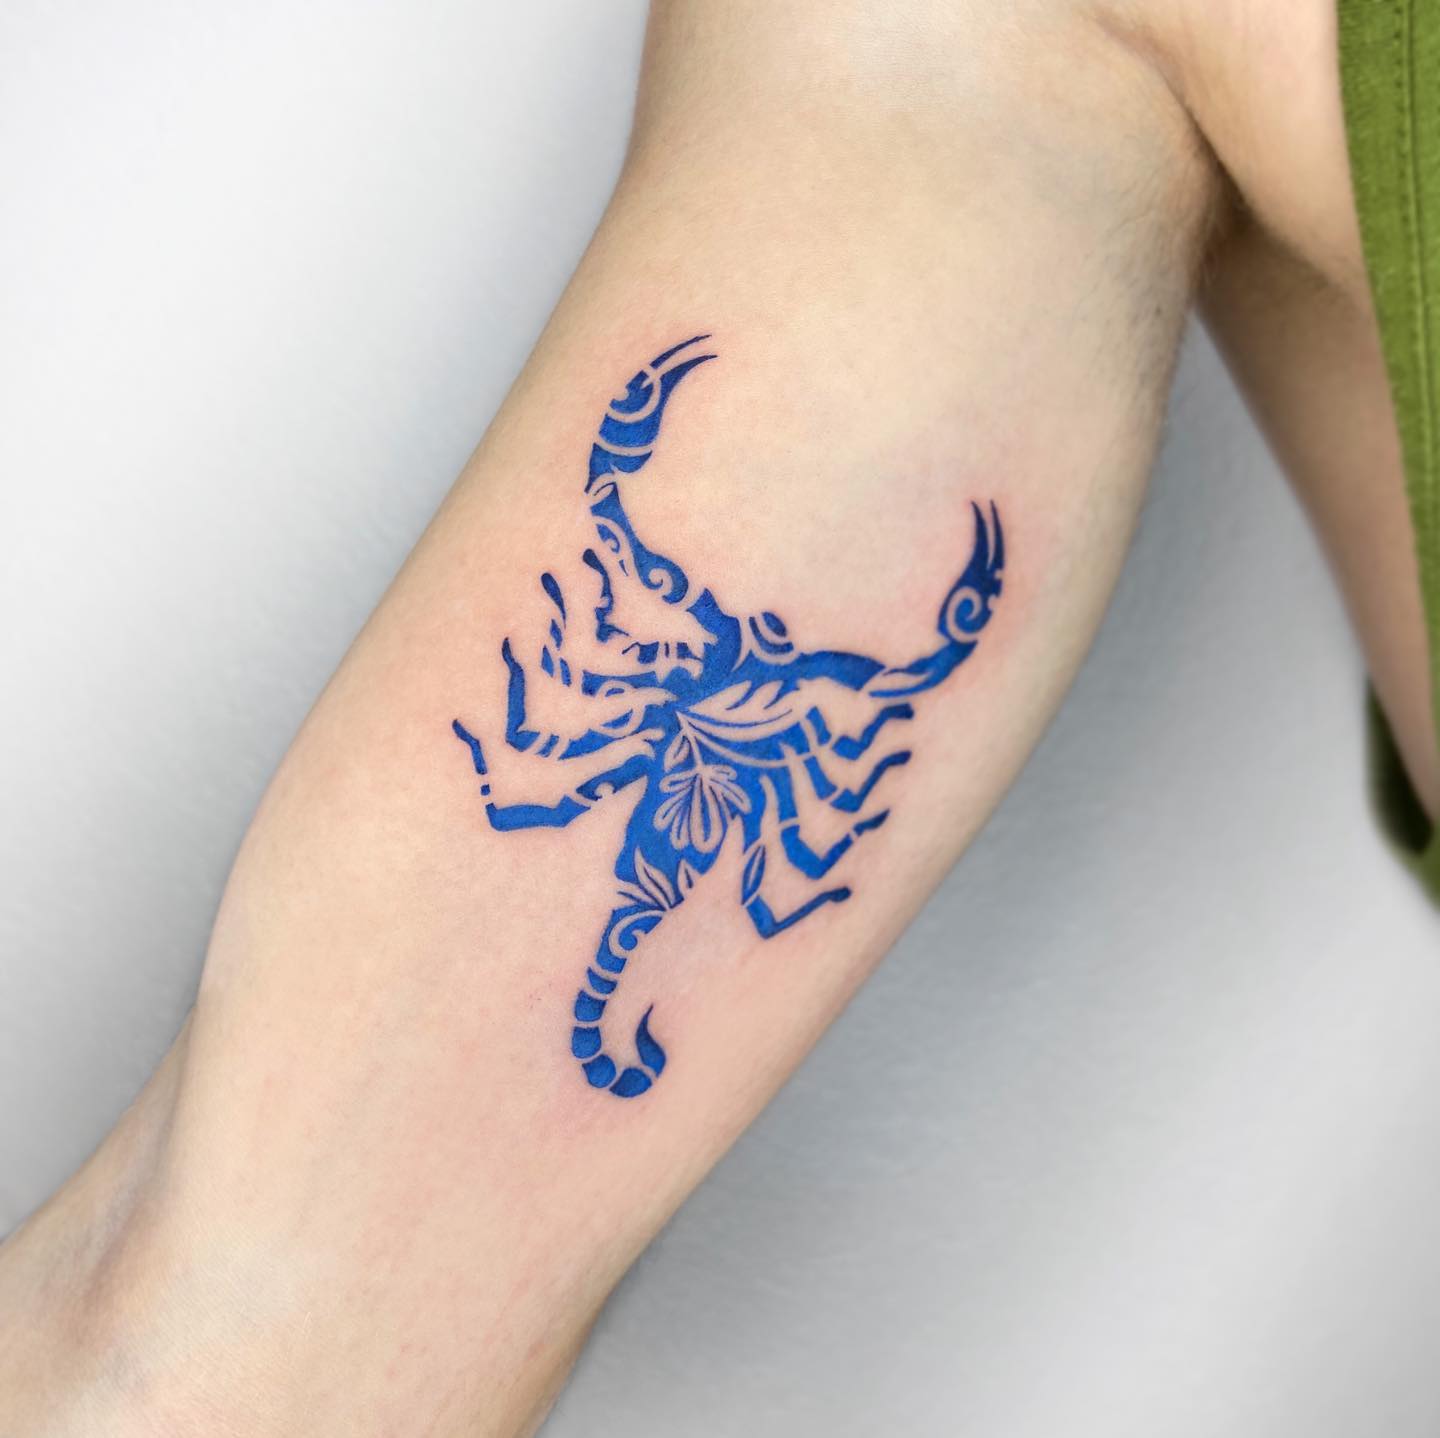 Scorpion Tattoos: Meanings, Styles and Design Ideas | Art and Design